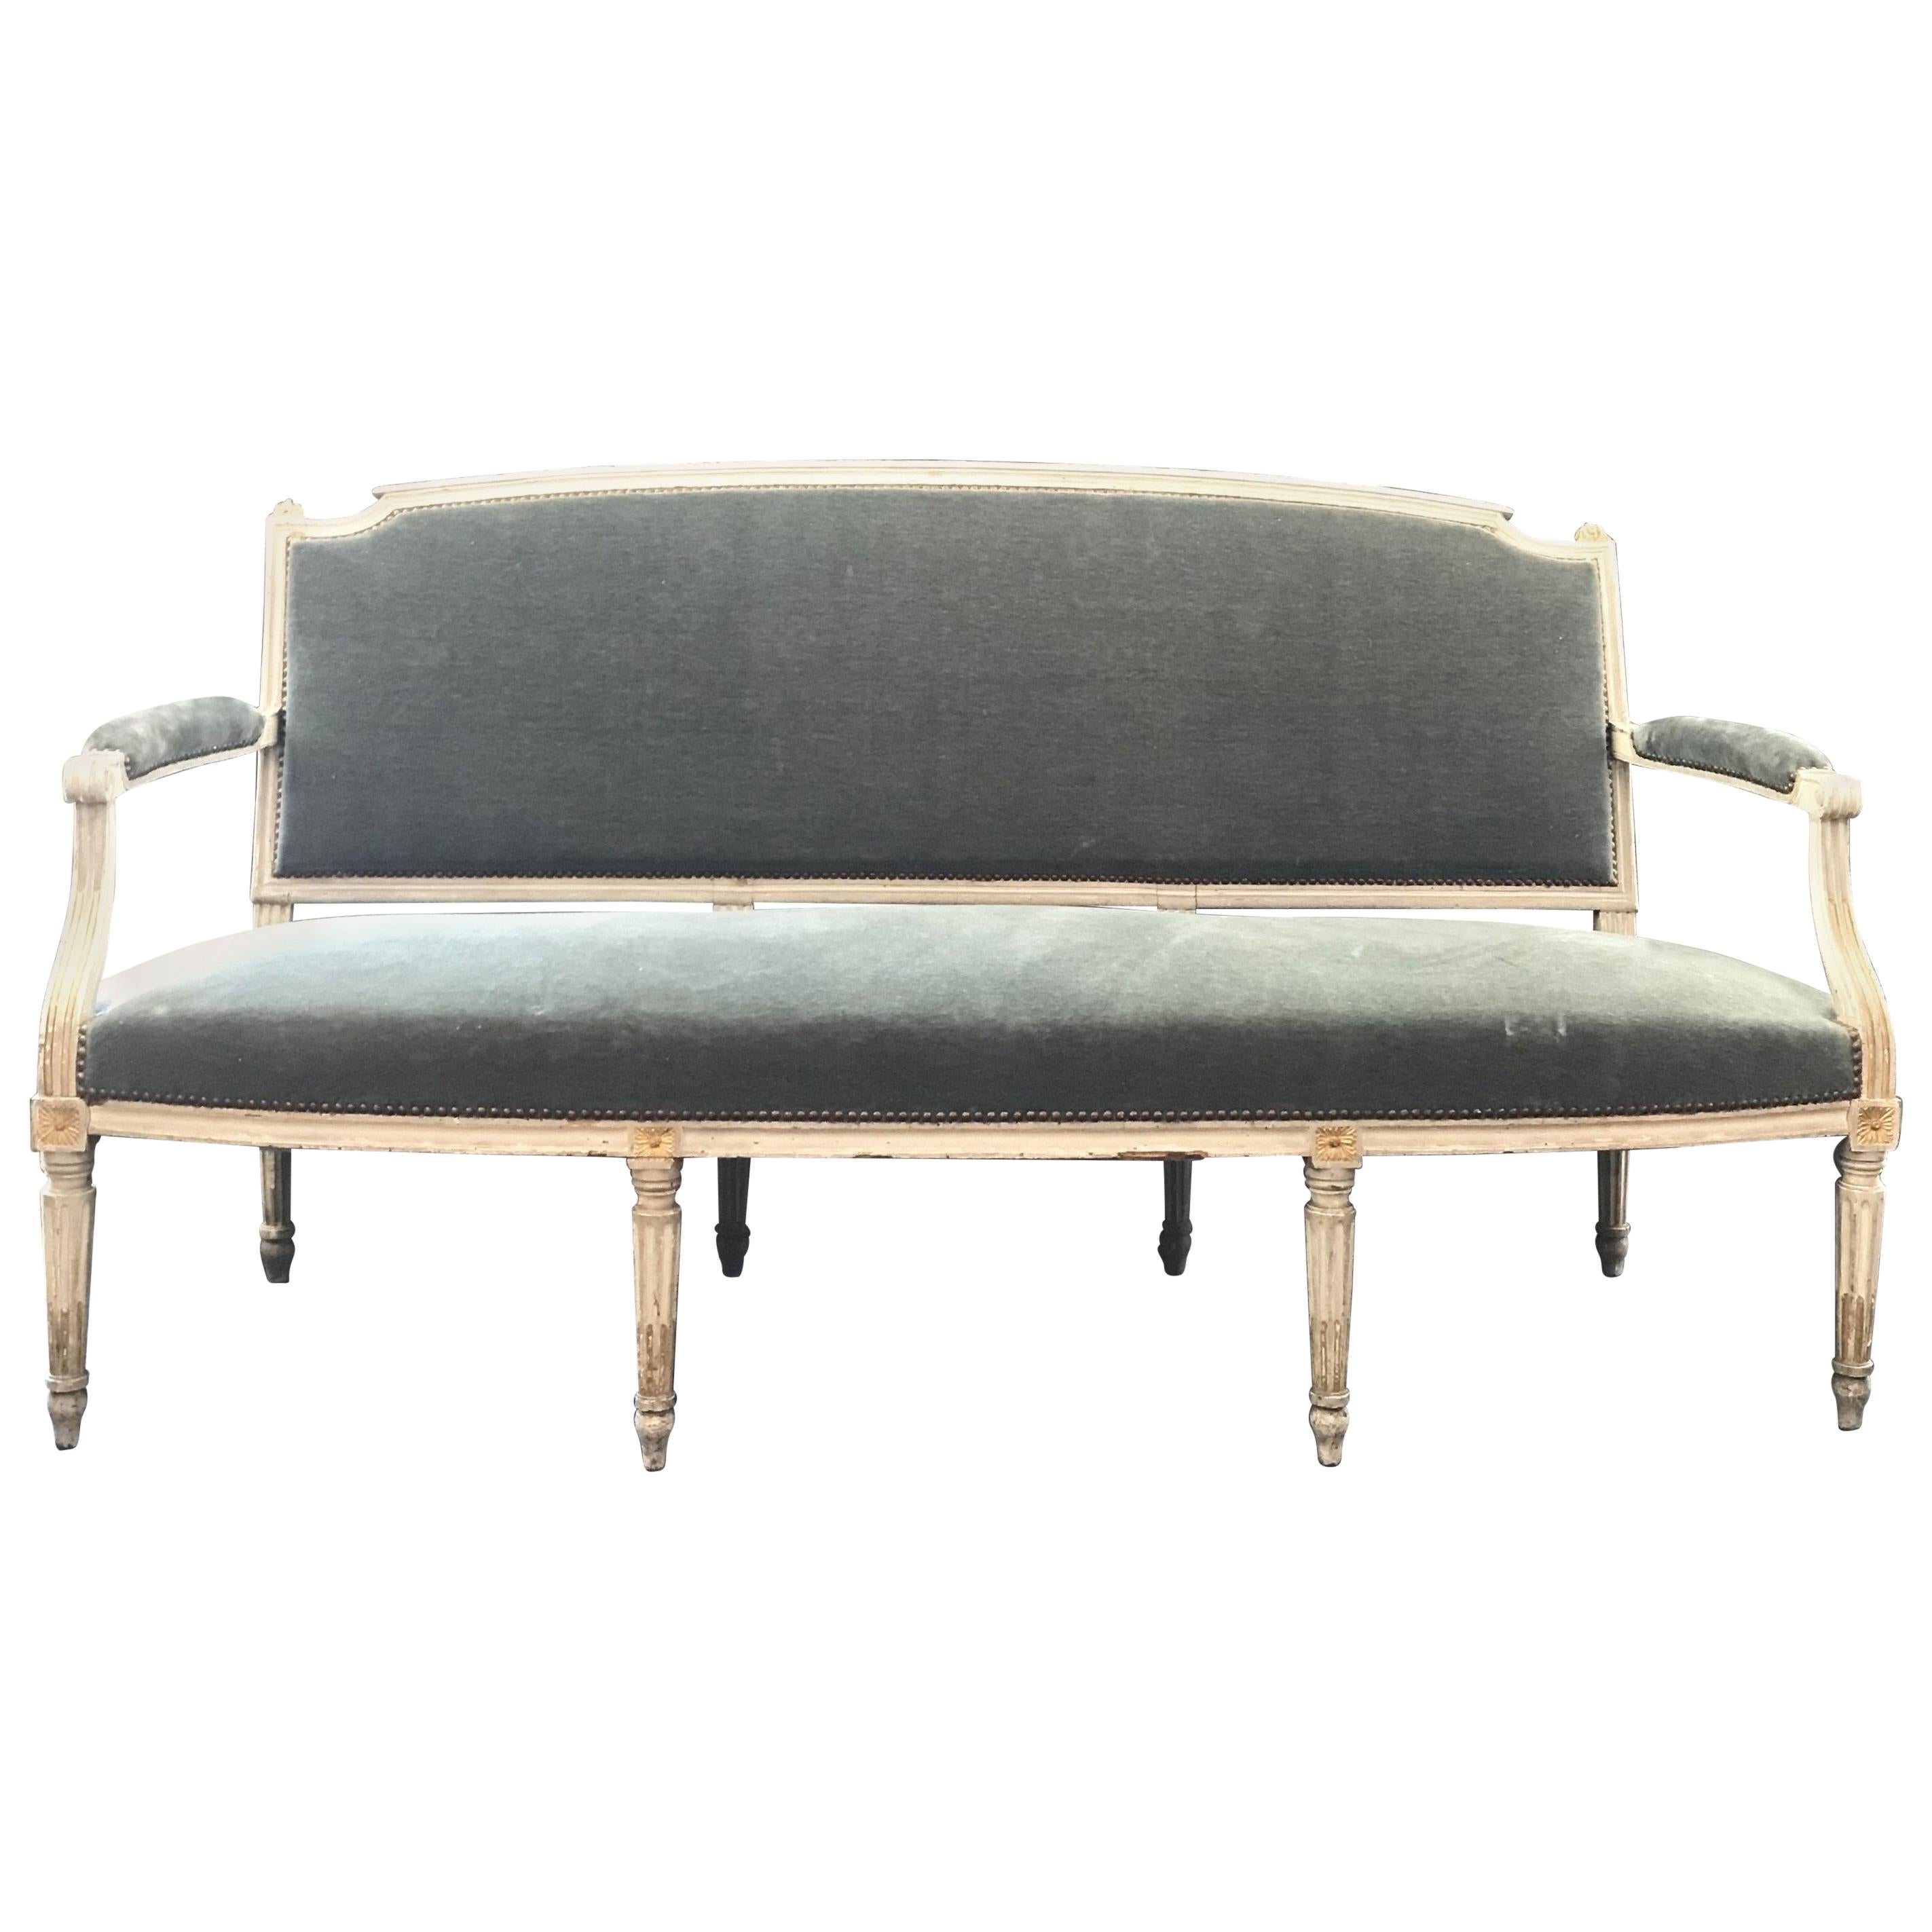  Exceptional Antique French Louis XVI Sofa Settee with Original Mohair